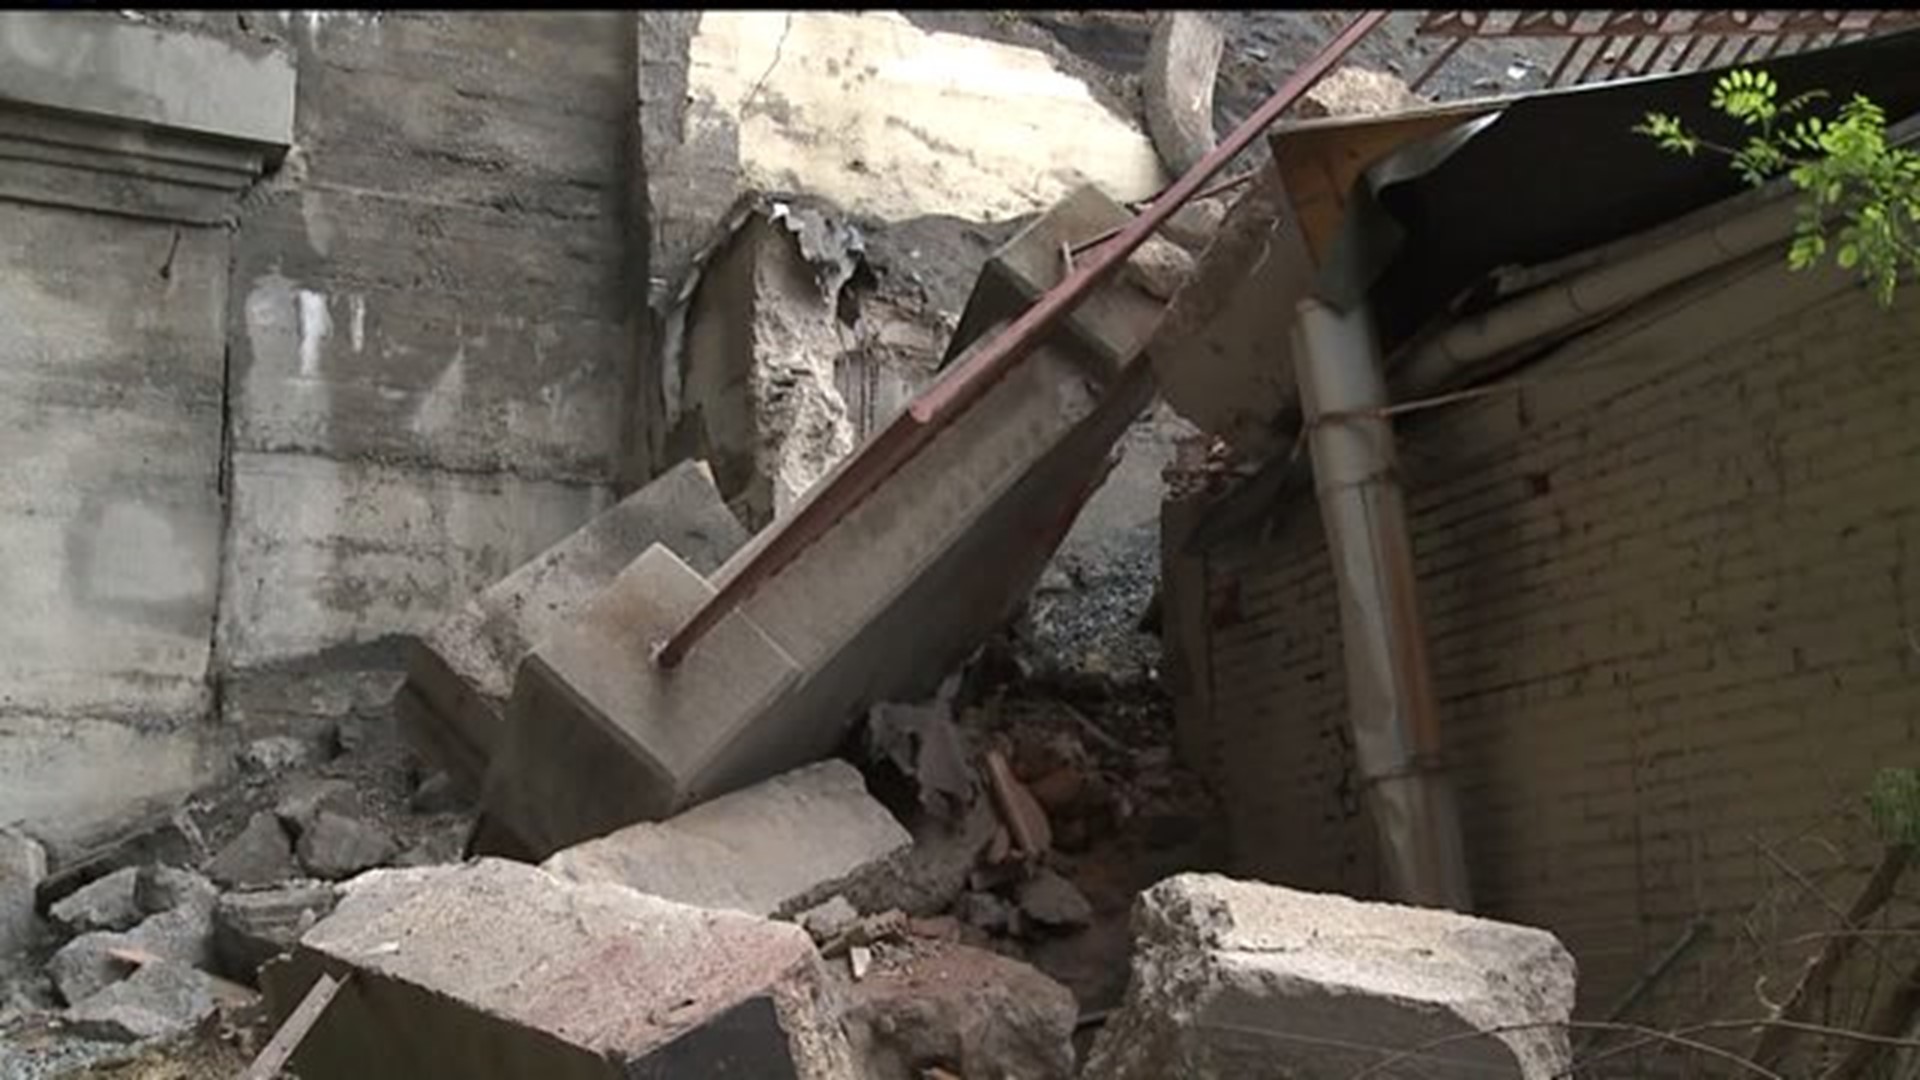 Work begins to determine liability in wall collapse